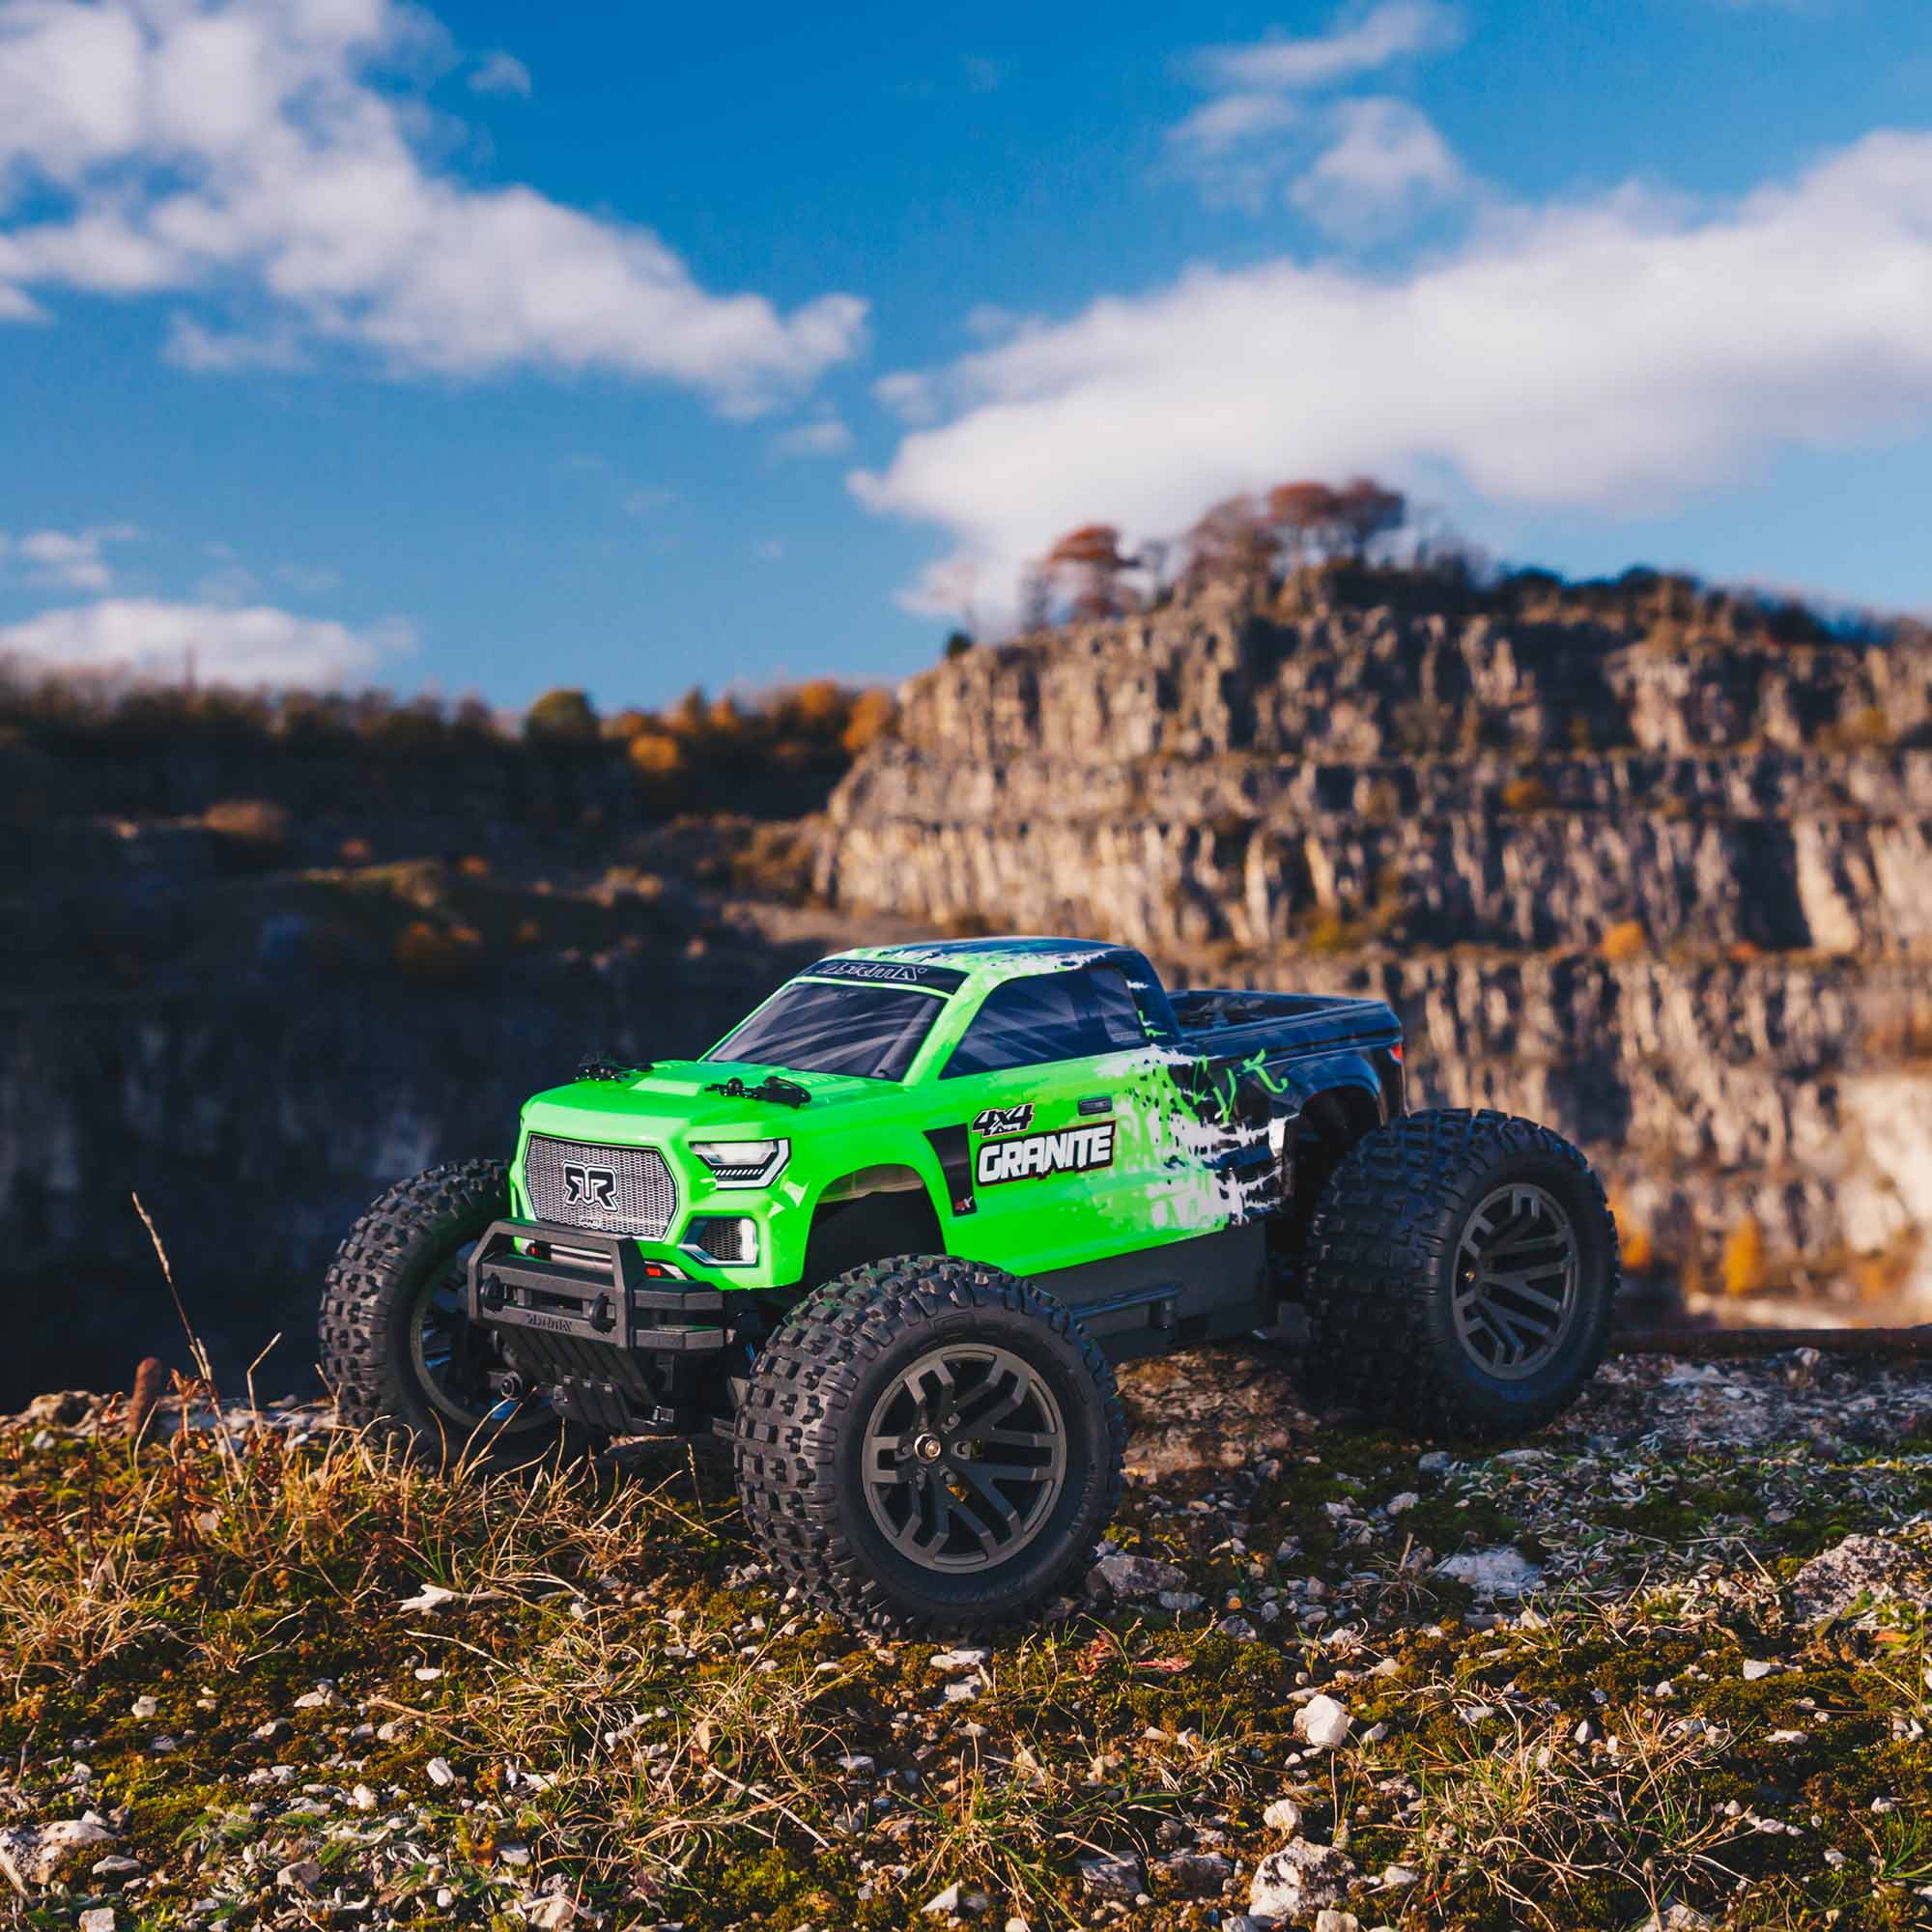 ARRMA RC Truck 1/10 GRANITE 4X4 V3 3S BLX Brushless Monster Truck RTR Battery and Charger Not Included Green ARA4302V3T1 Trucks Electric RTR 1/10 Off-Road - image 5 of 11